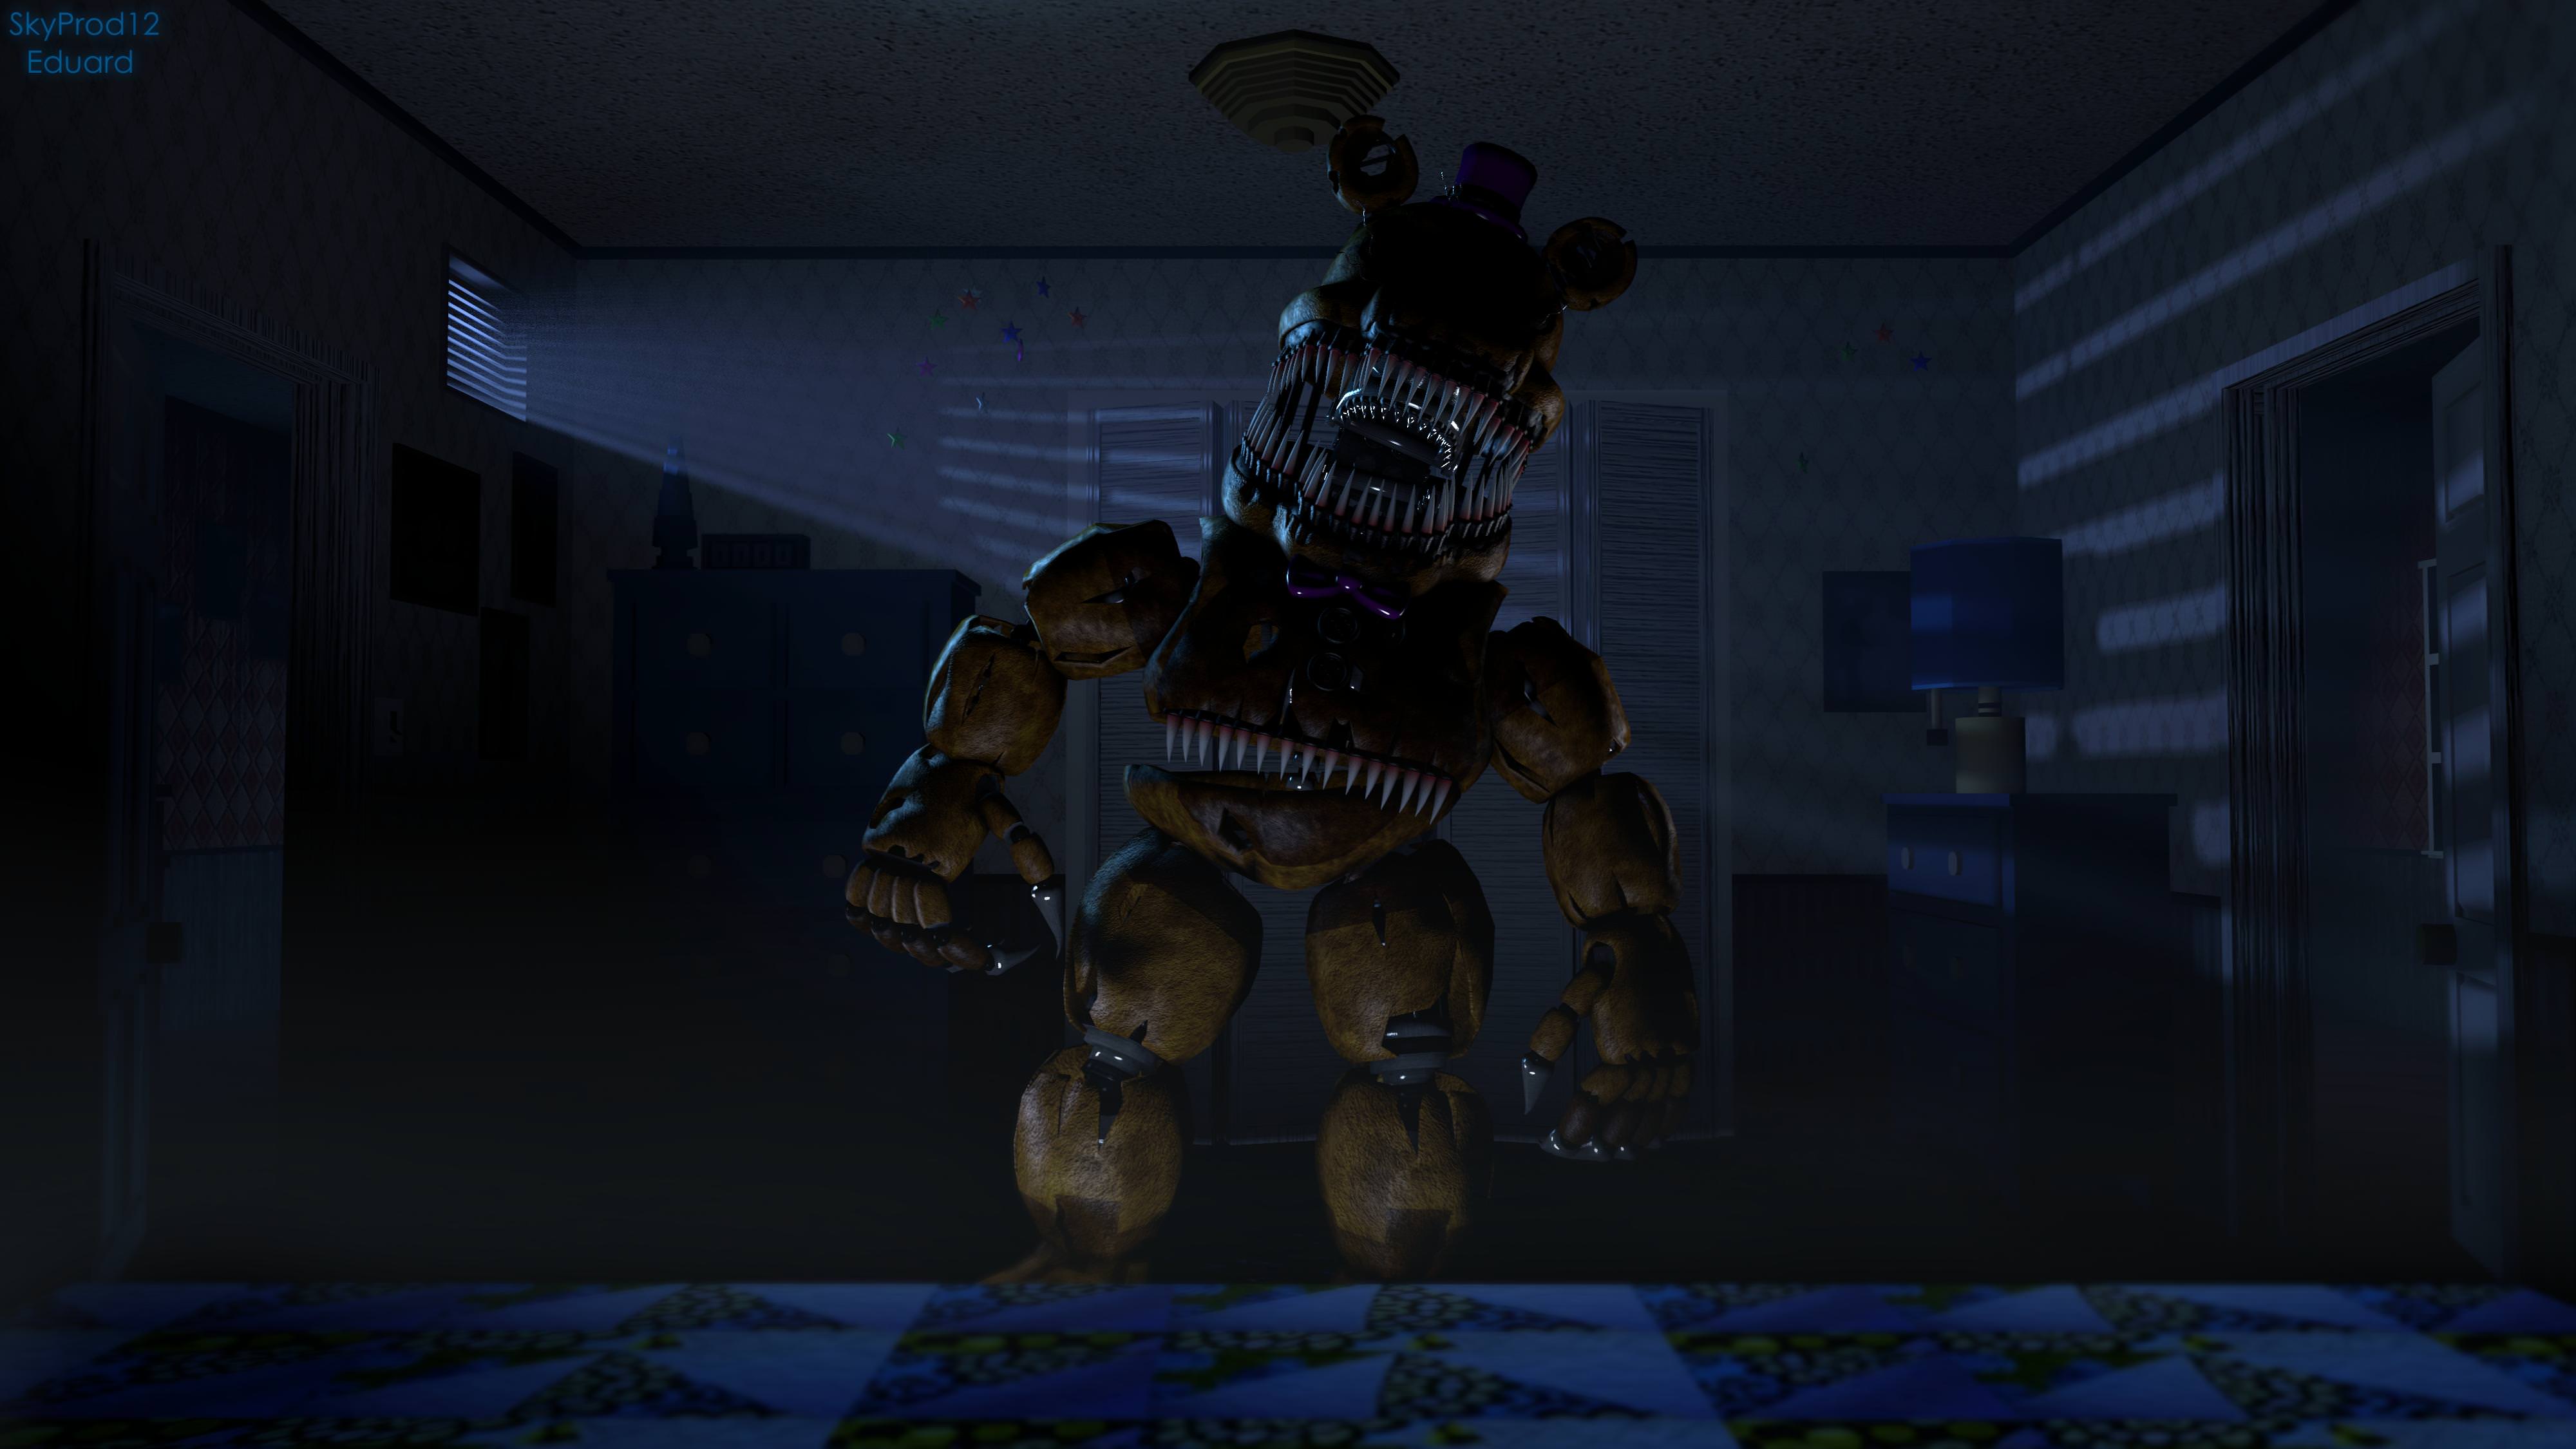 five nights at freddy's wallpaper,blue,pc game,screenshot,darkness,digital compositing